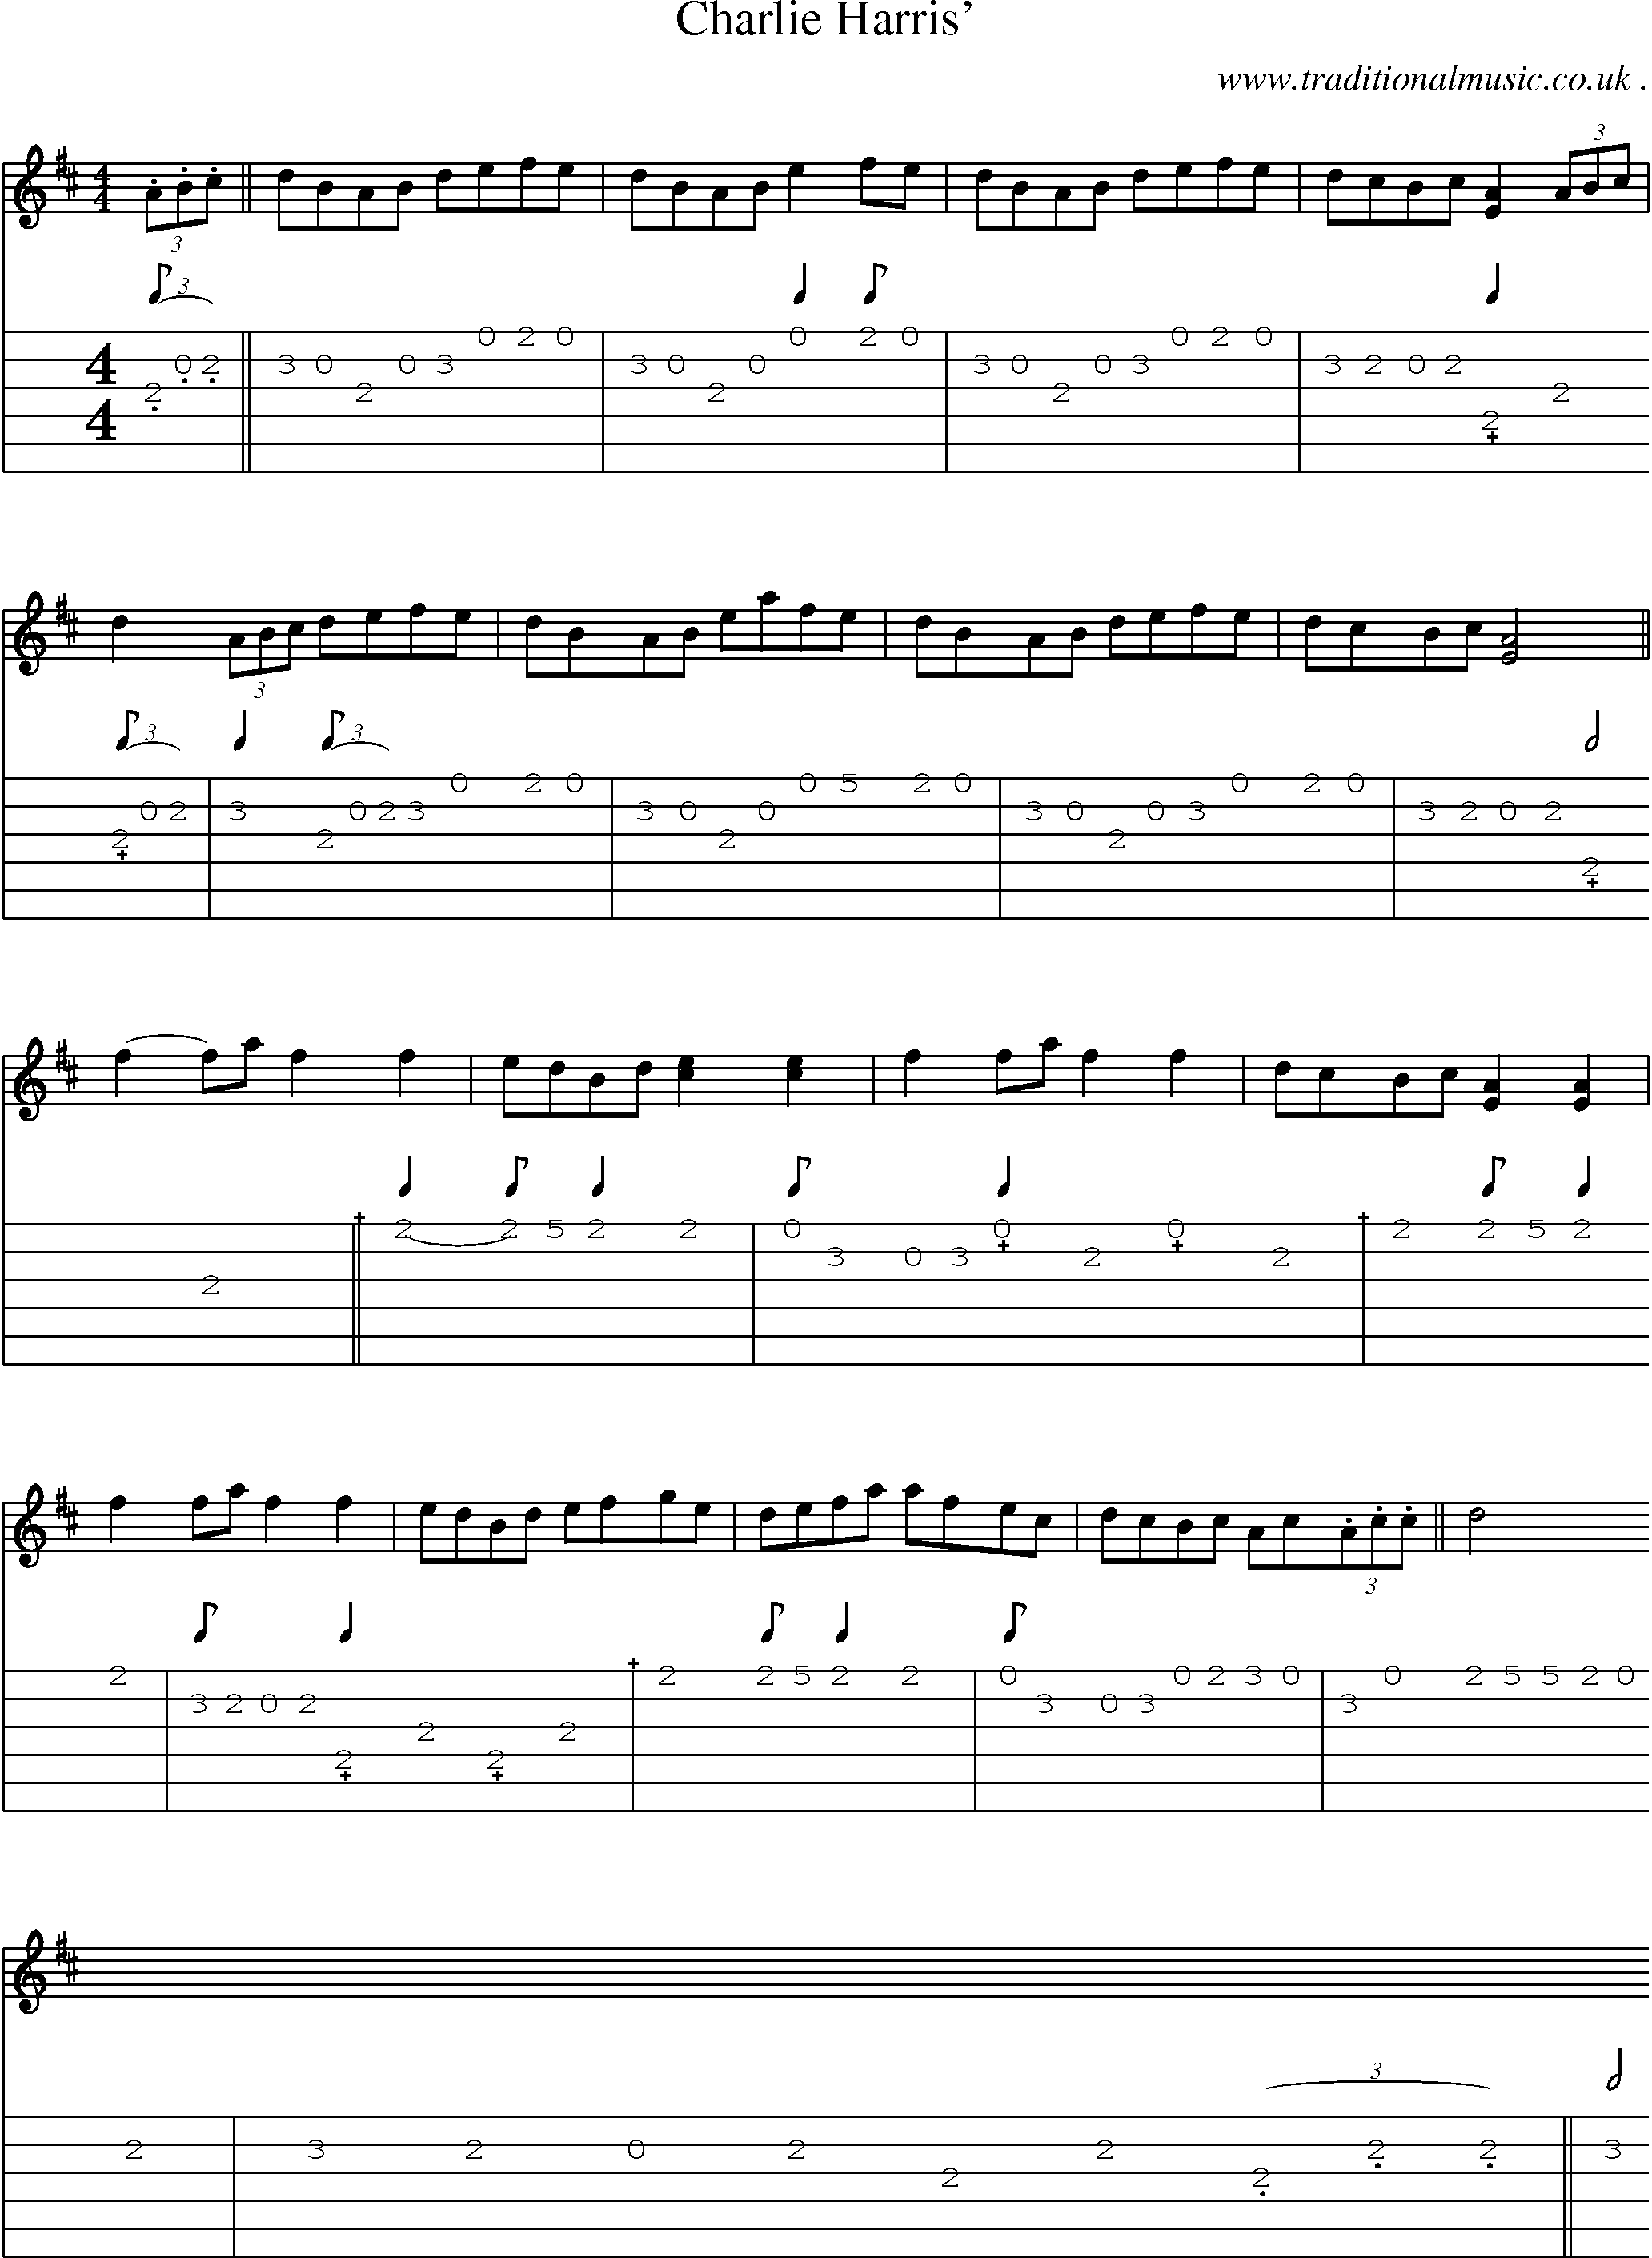 Sheet-Music and Guitar Tabs for Charlie Harris